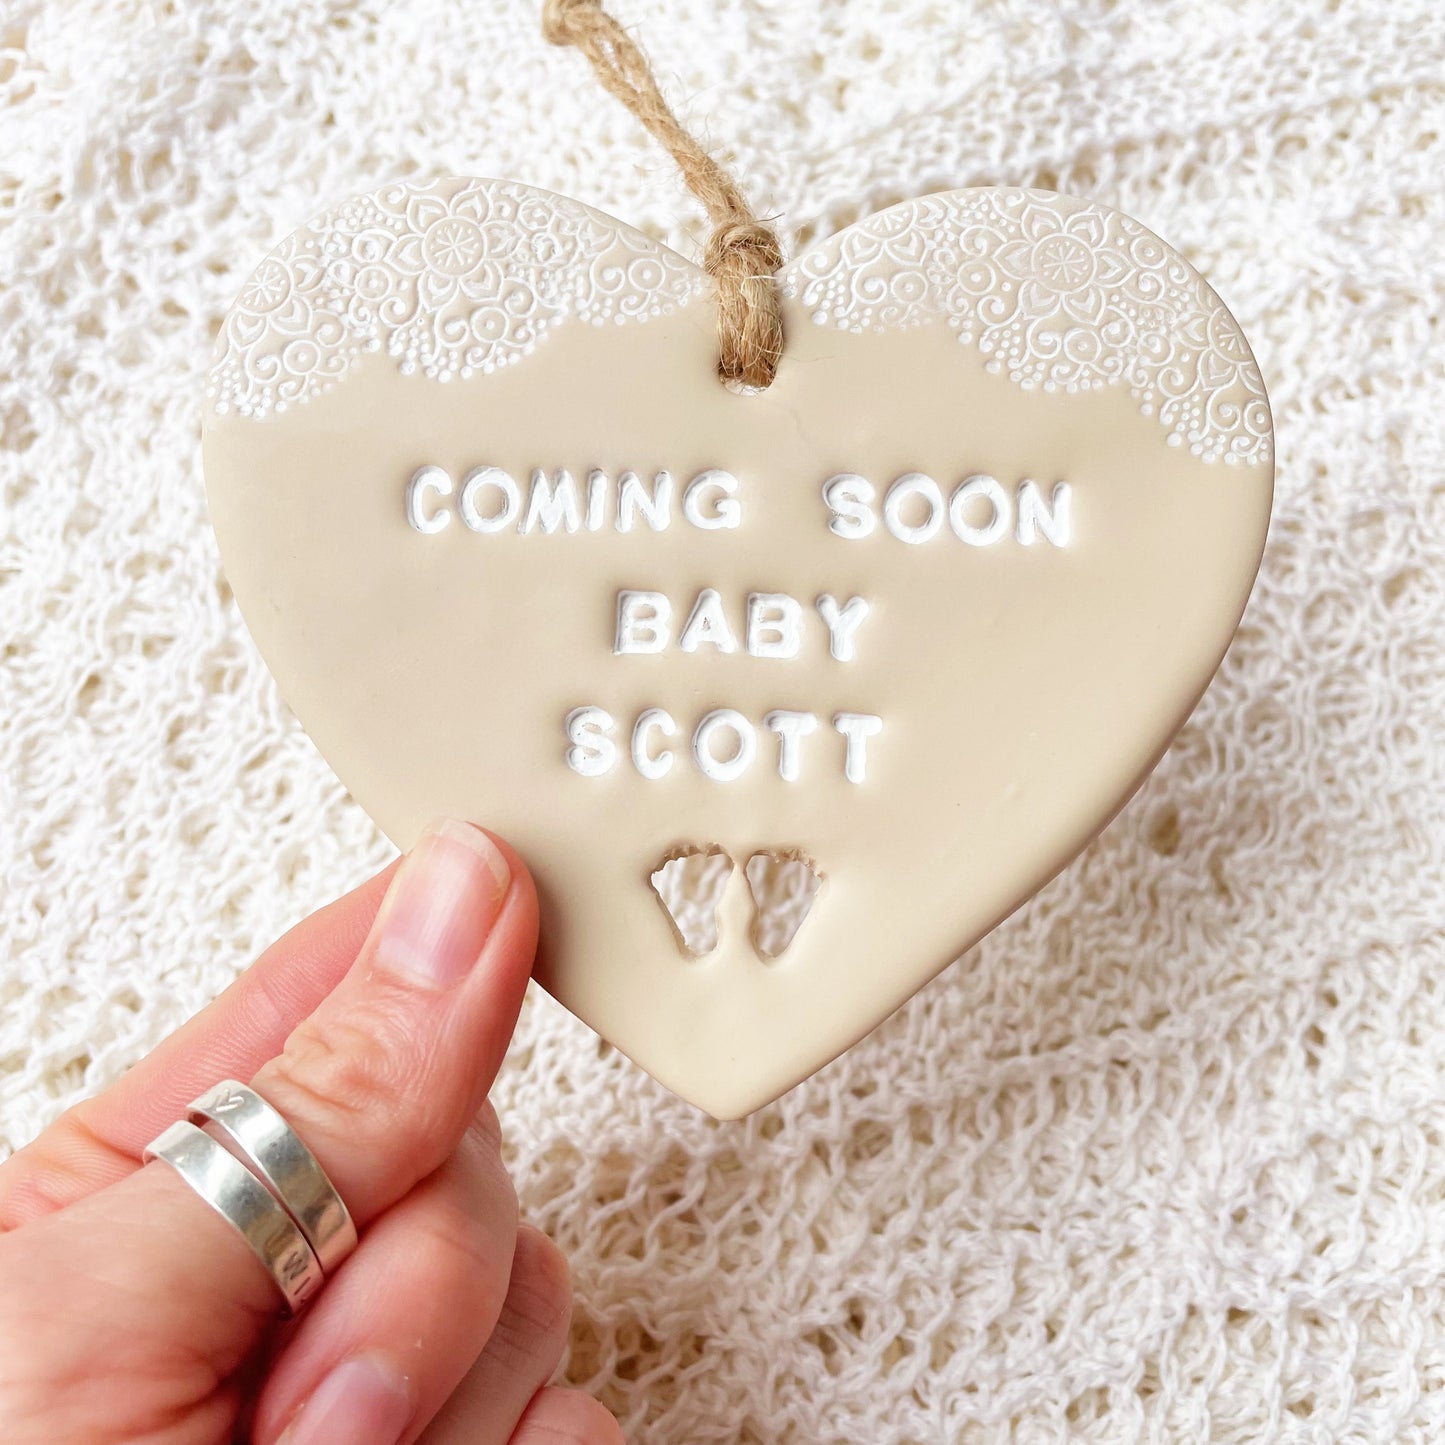 Personalised pregnancy reveal sign keepsake, beige clay hanging heart with a white lace edge at the top of the heart and baby feet cut out at the bottom, the heart is personalised with COMING SOON BABY SCOTT